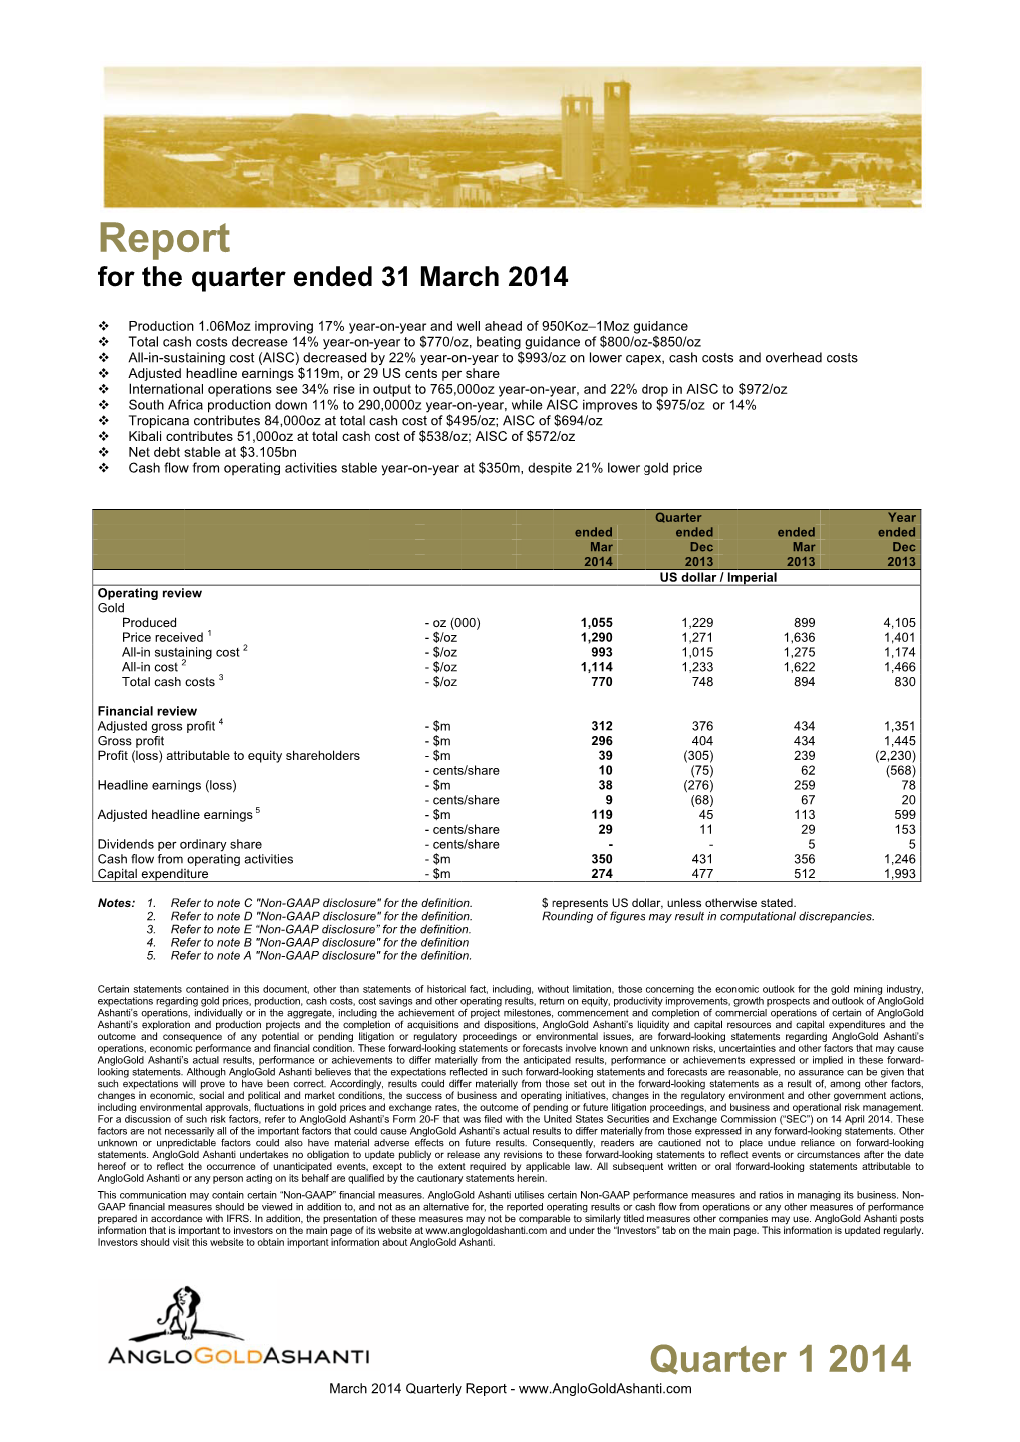 Report for the Quarter Ended 31 March 2014